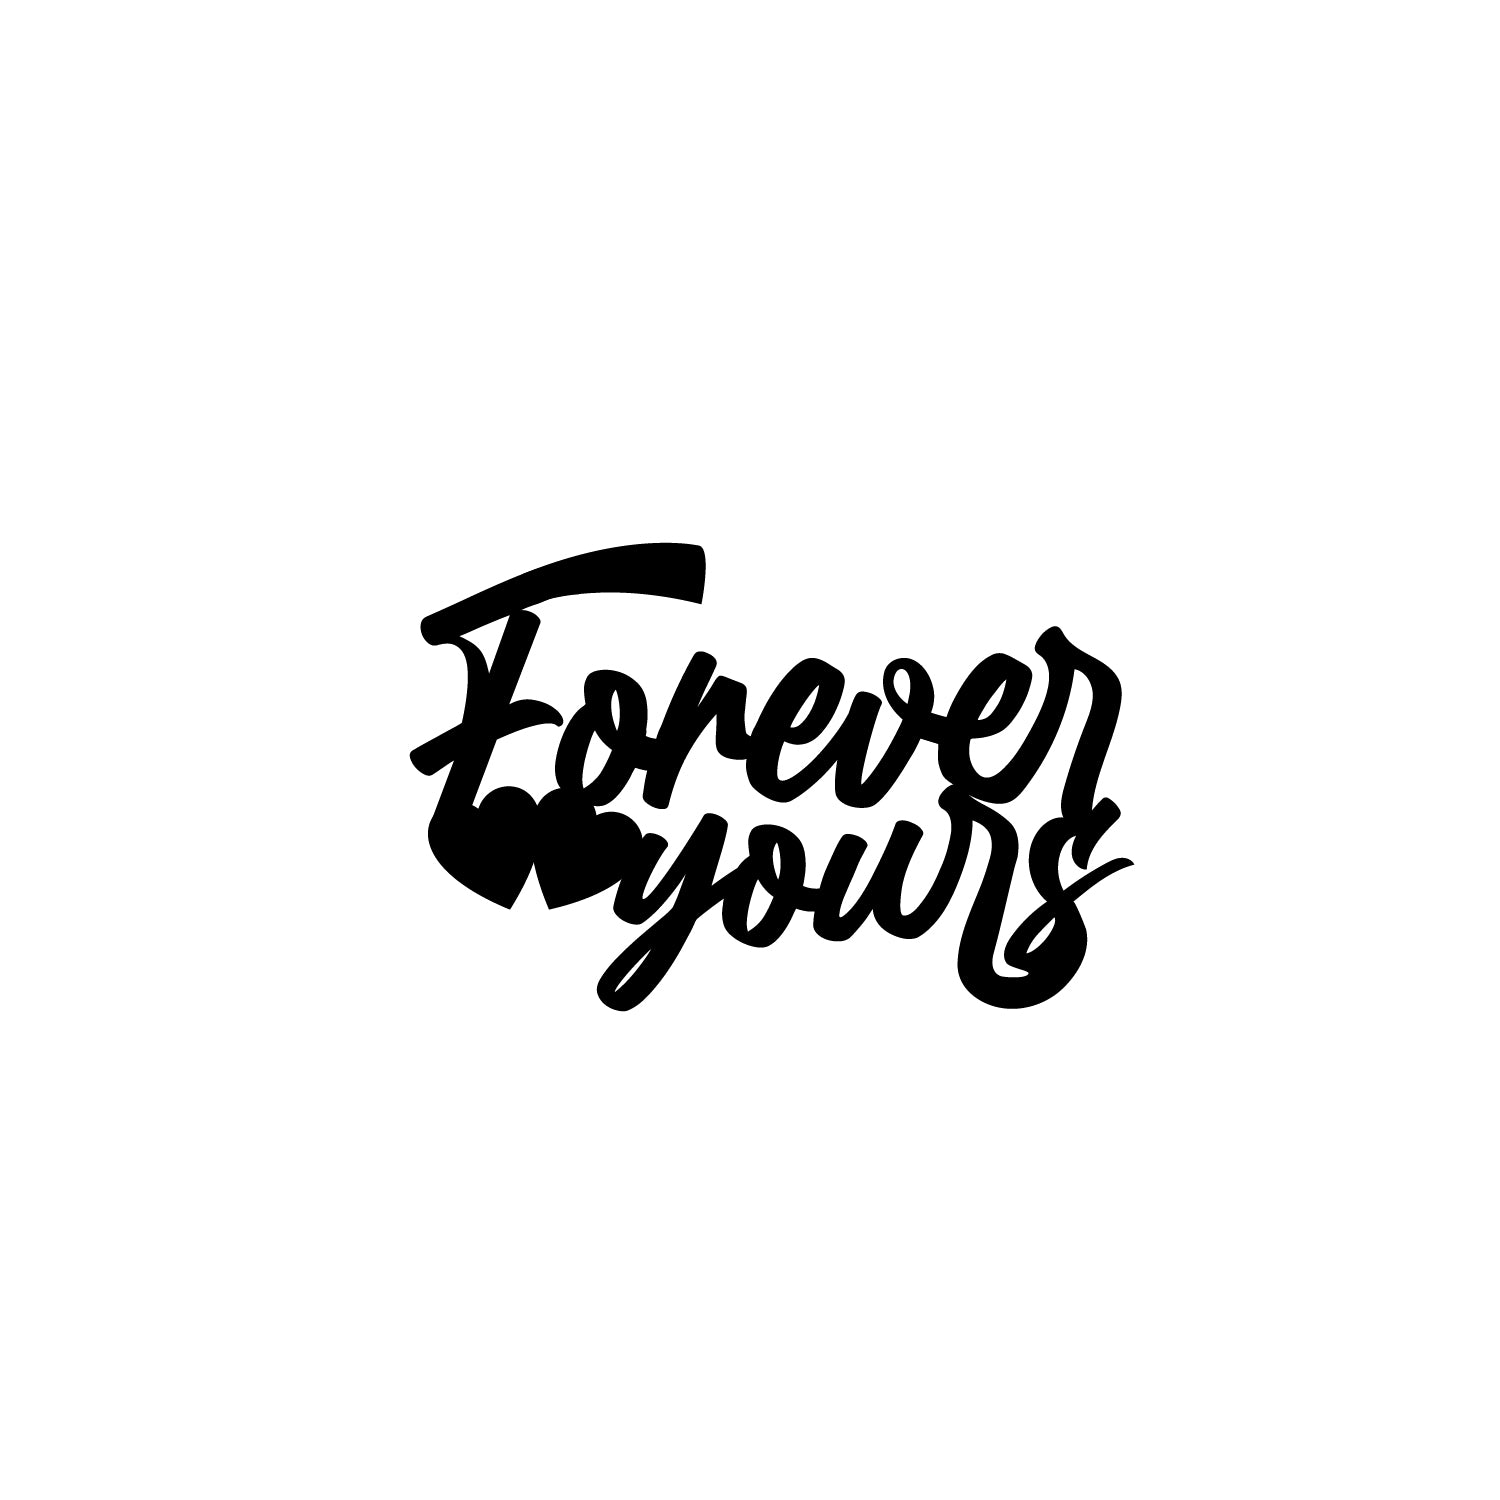 "Forever Yours" Love Theme Black Engineered Wood Wall Art Cutout, Ready to Hang Home Decor 2